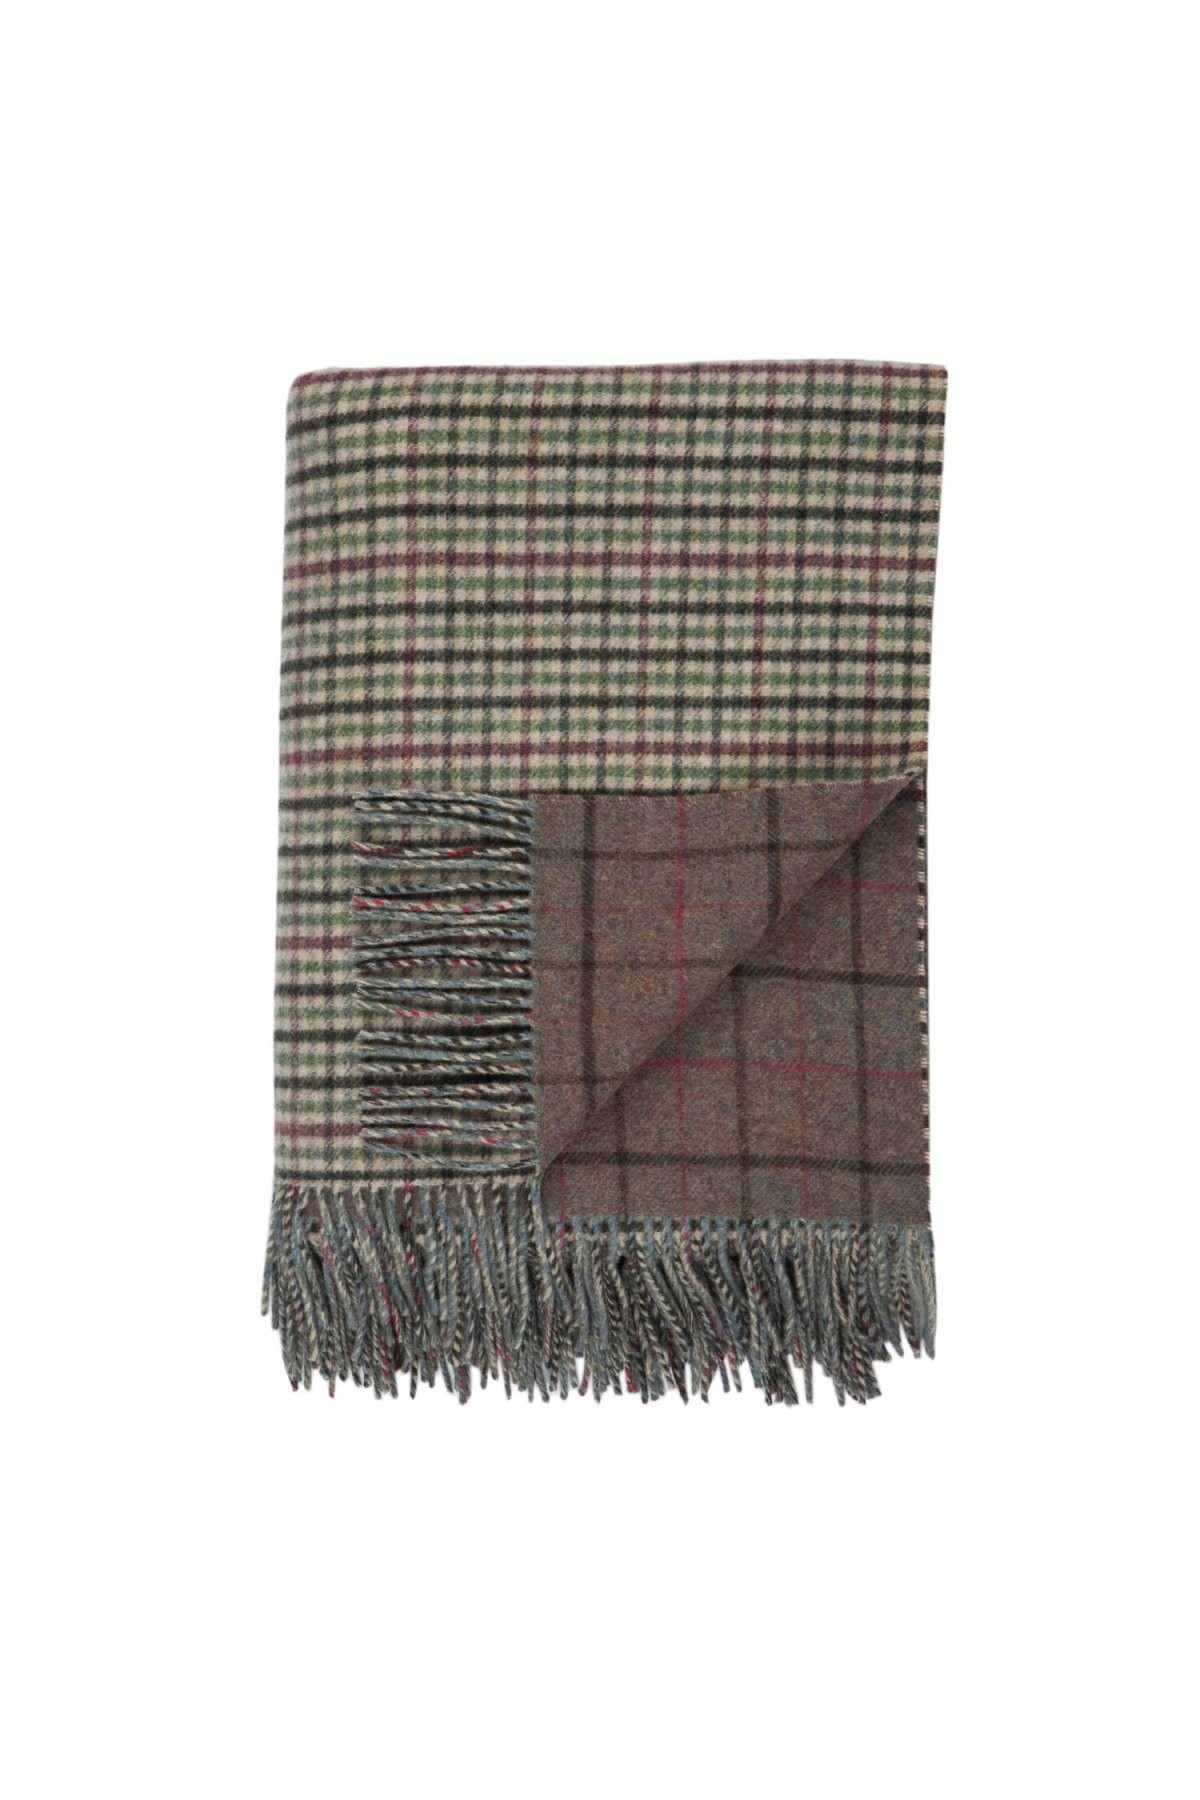 Johnston's of Elgin Lambswool Check Throw - Lossiemouth